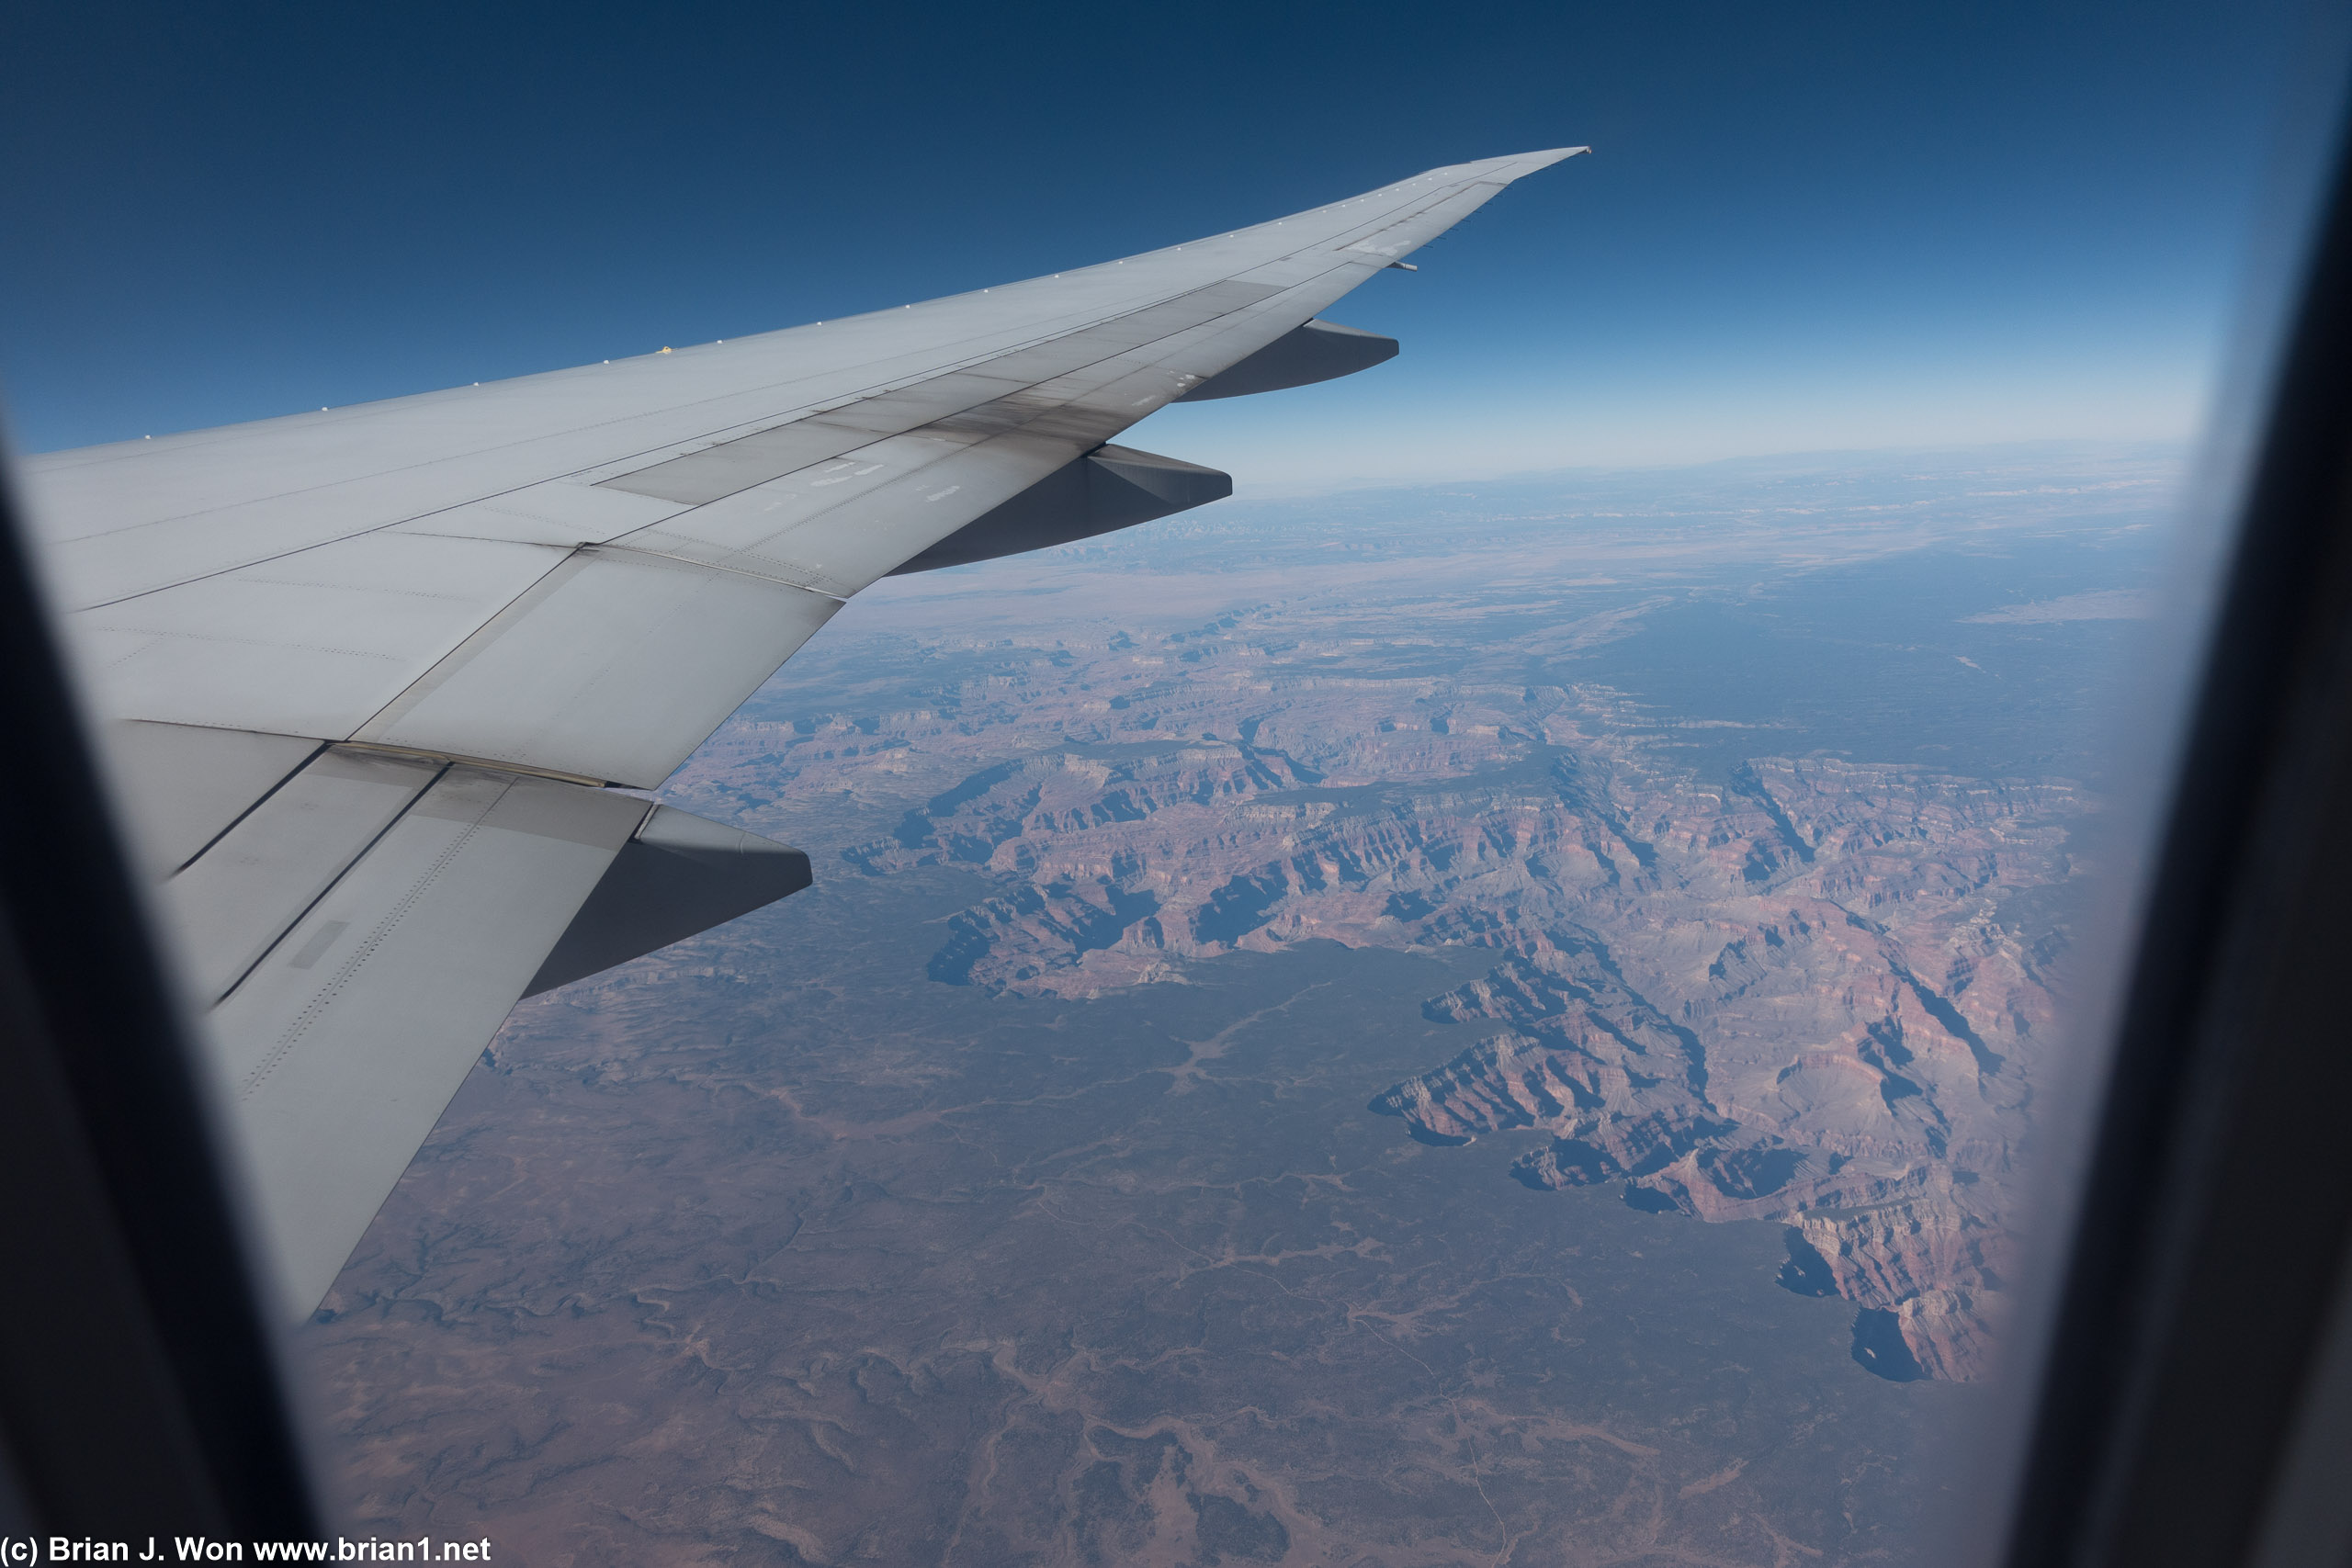 Over the Grand Canyon.